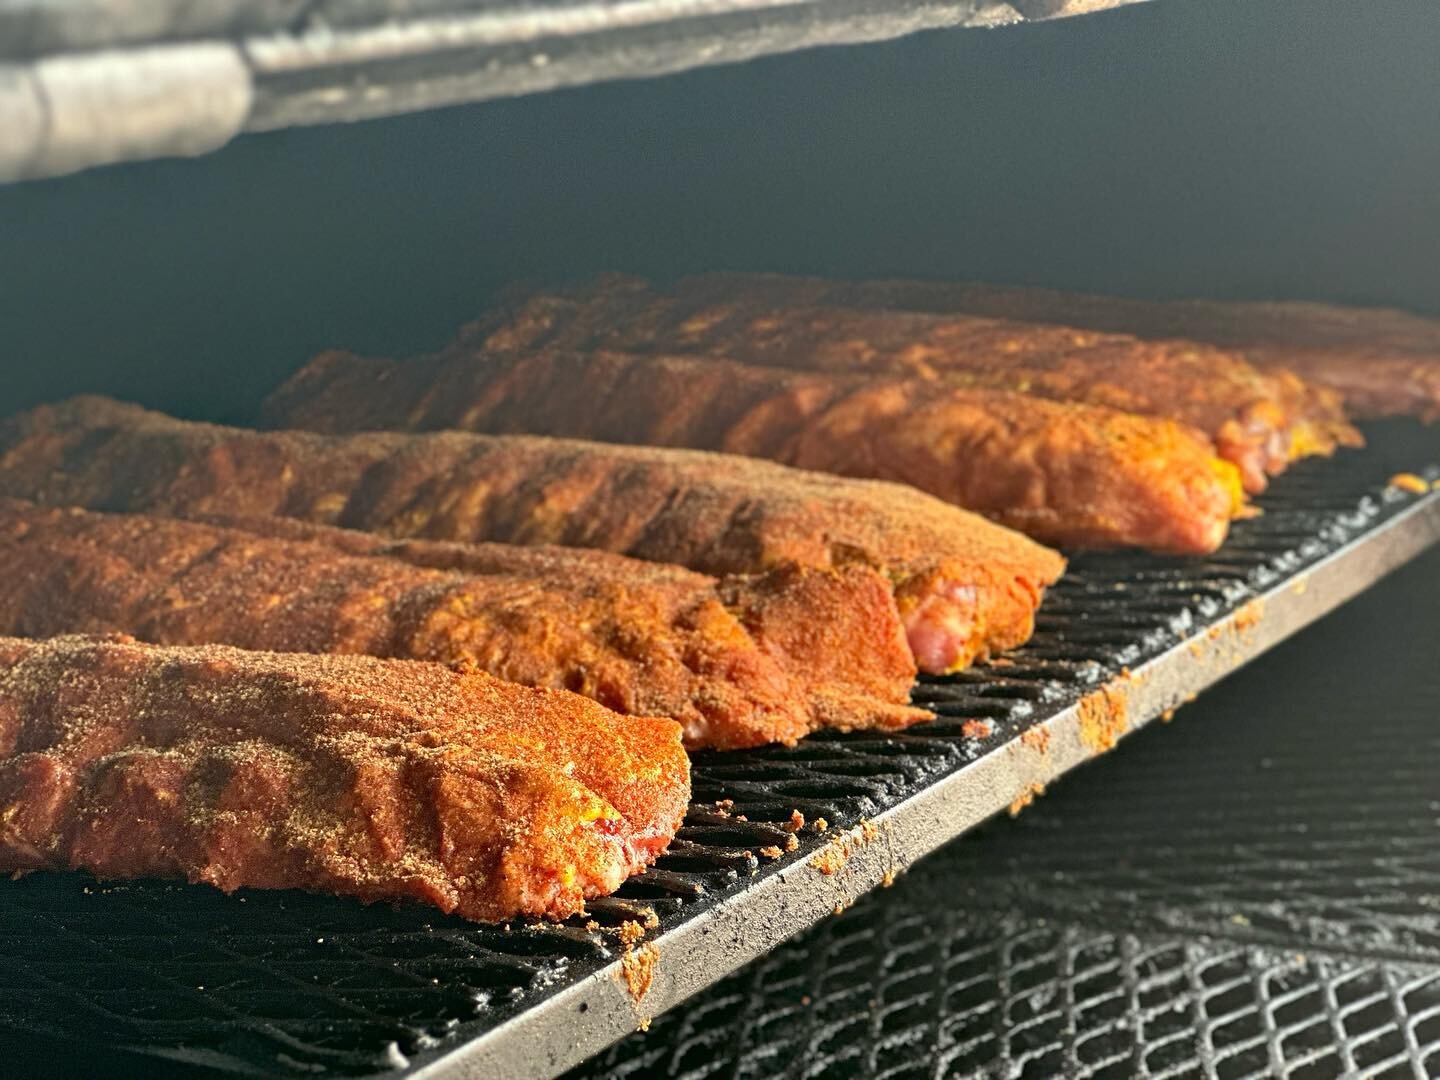 Give dad the day off from the grill and treat him to house smoked meats! 
BBQ is available starting at 2:00 until we run out! 🍖 

#bbq #fathersday #gulfportfl #gulfportflorida #smokemeateveryday #smokedmeat #stpetebbq